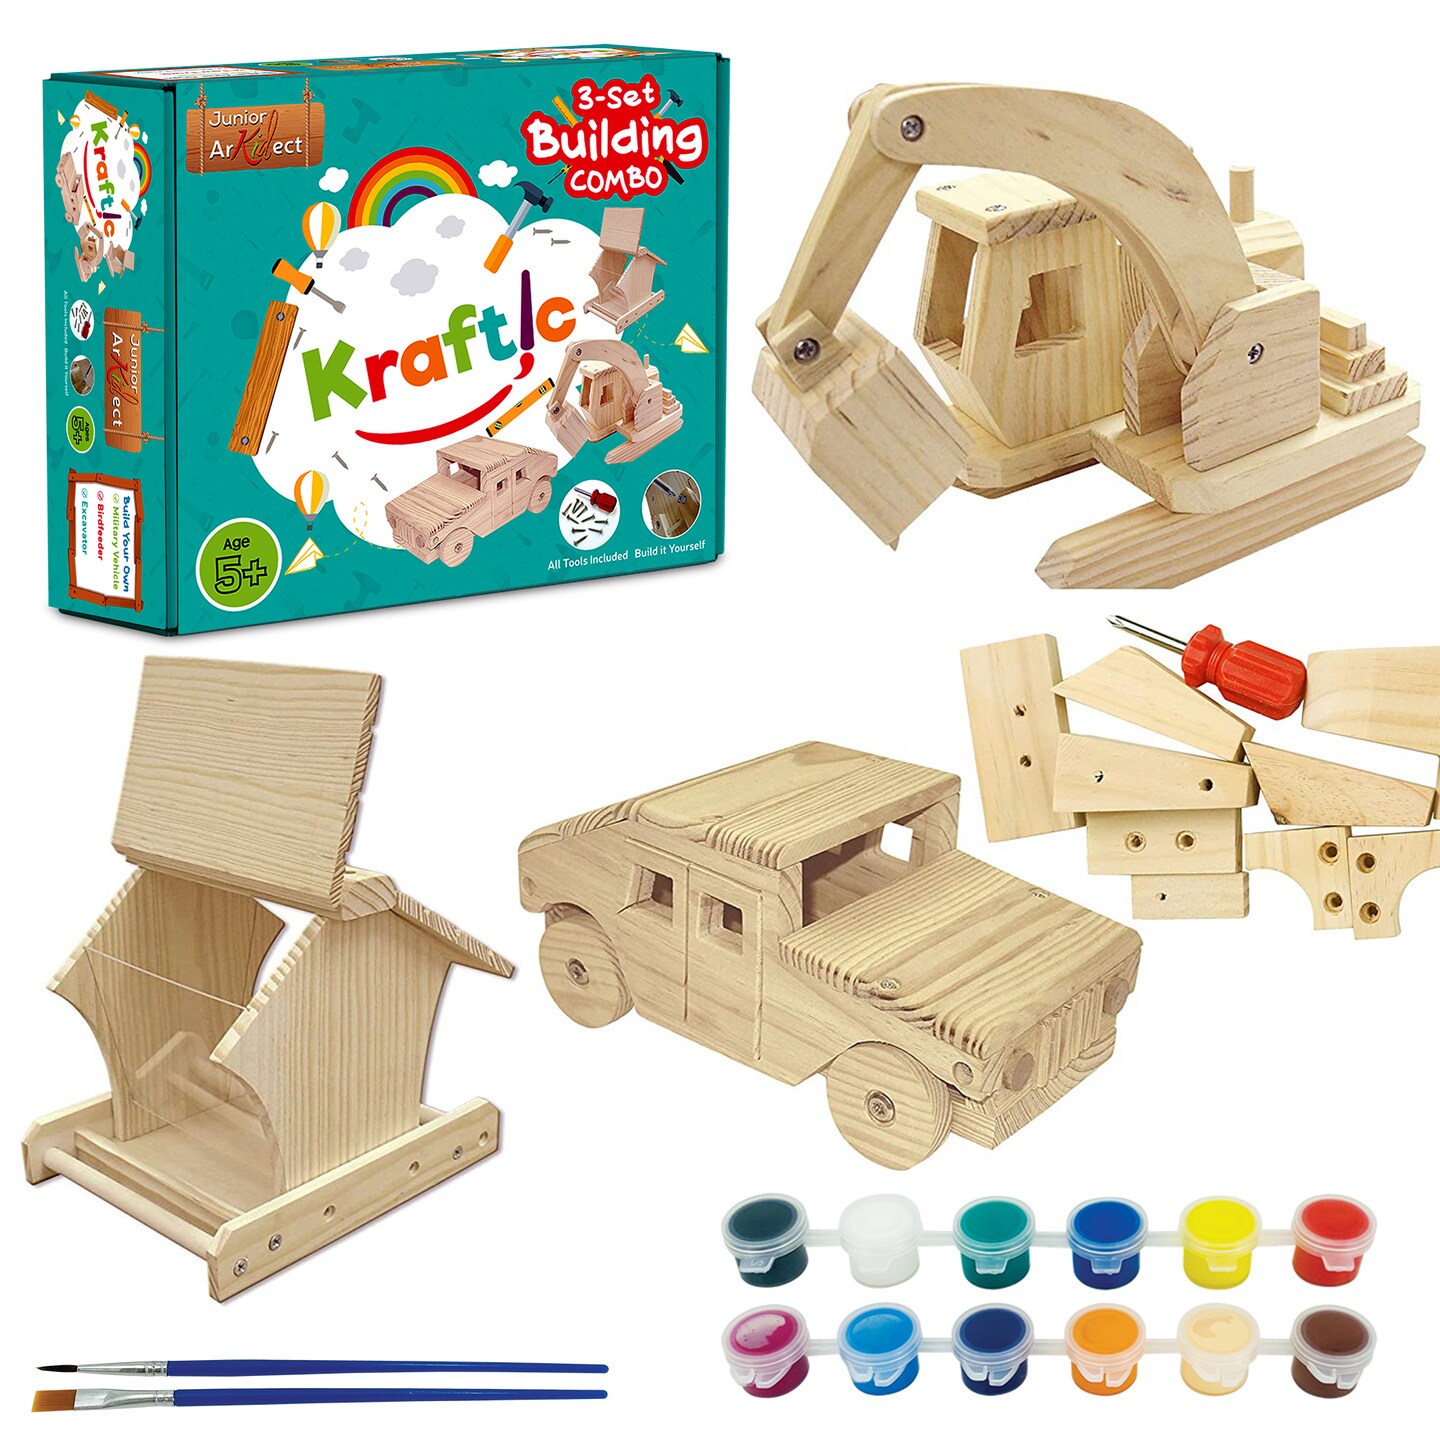 Woodworking with Kids  Woodworking projects for kids, Woodworking kit for  kids, Woodworking kits